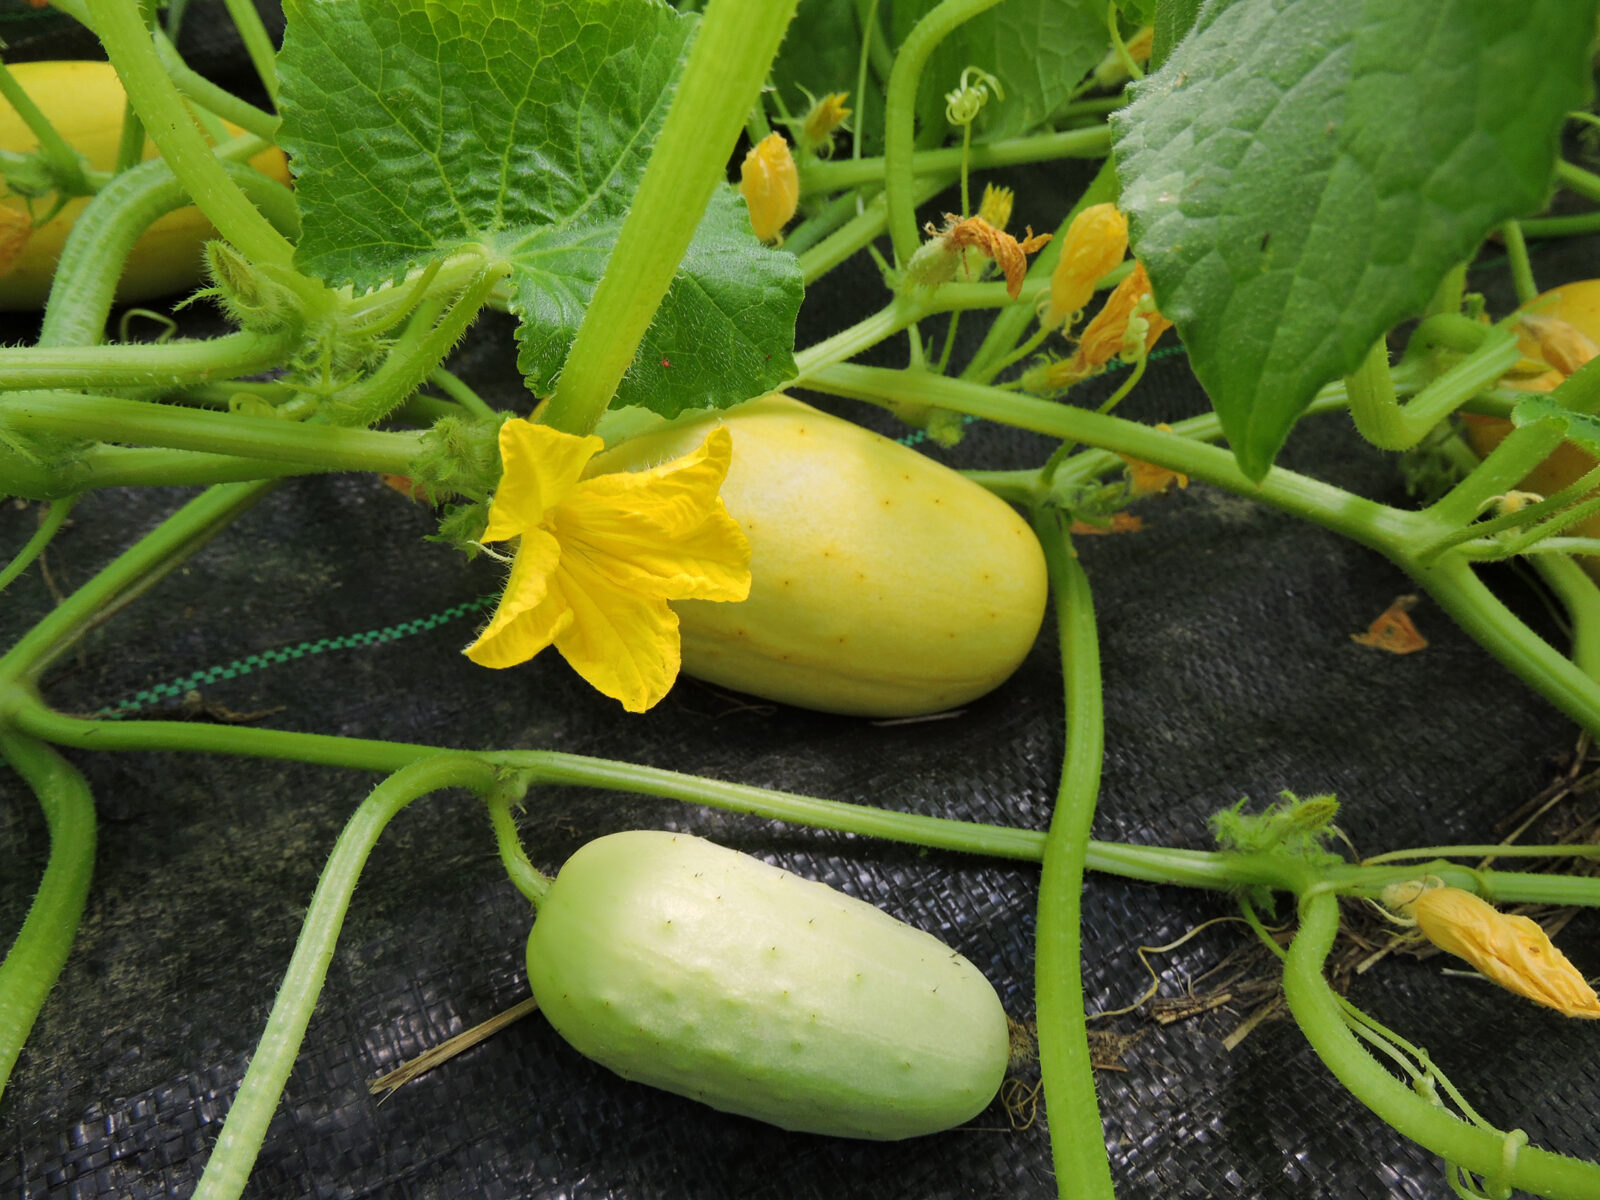 Several small 'North Carolina Heirloom' cucumbers growing on the vine